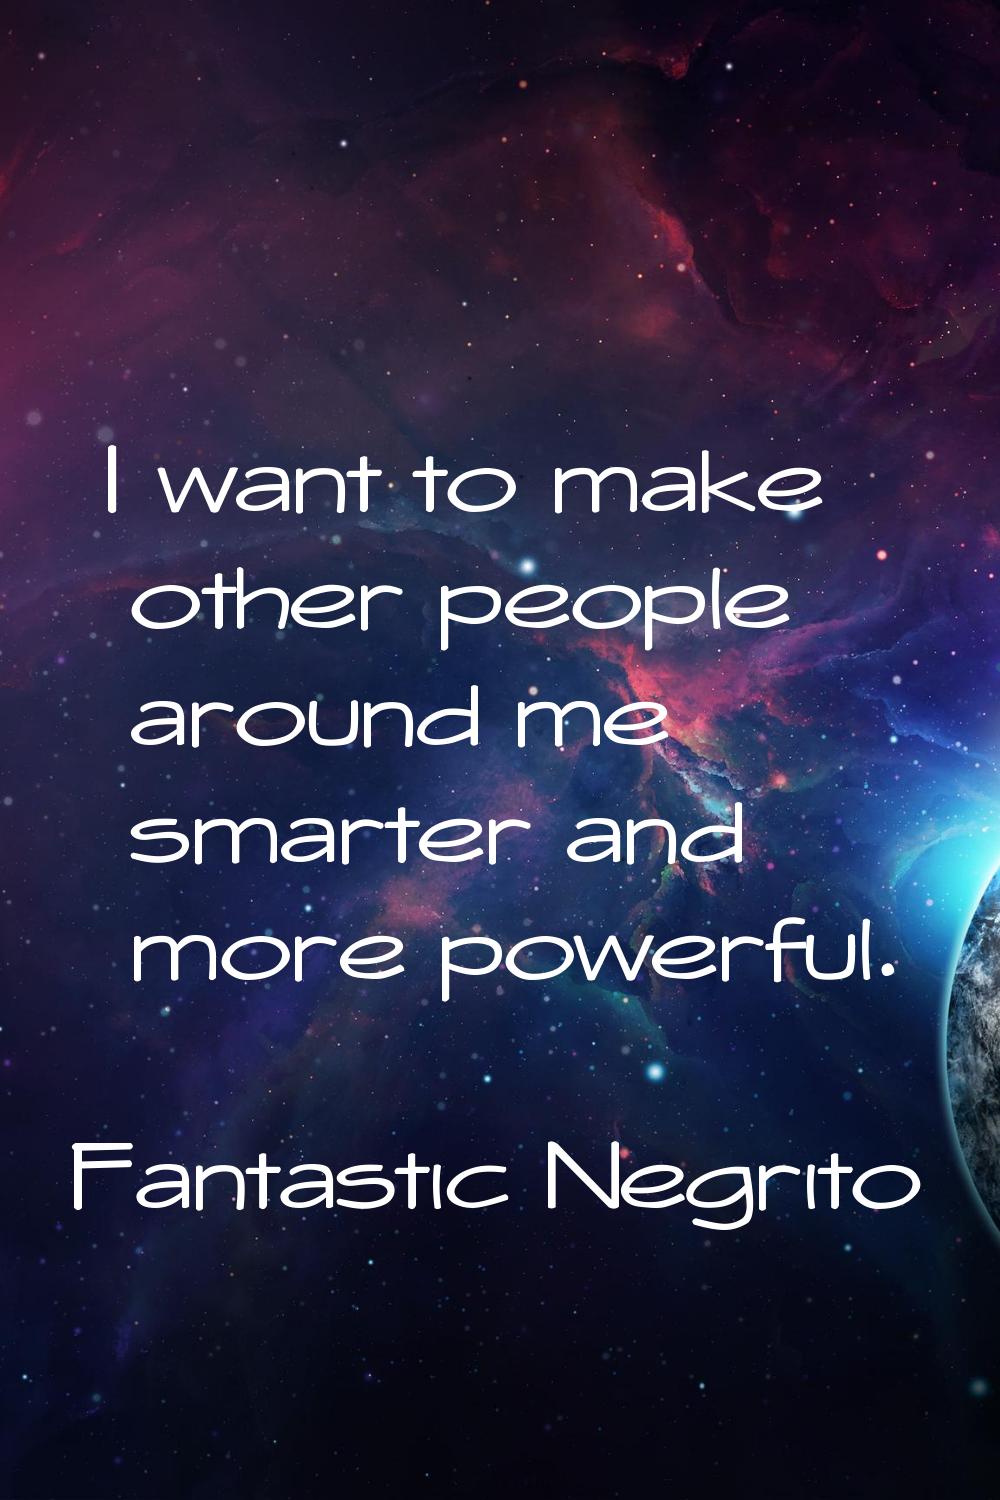 I want to make other people around me smarter and more powerful.